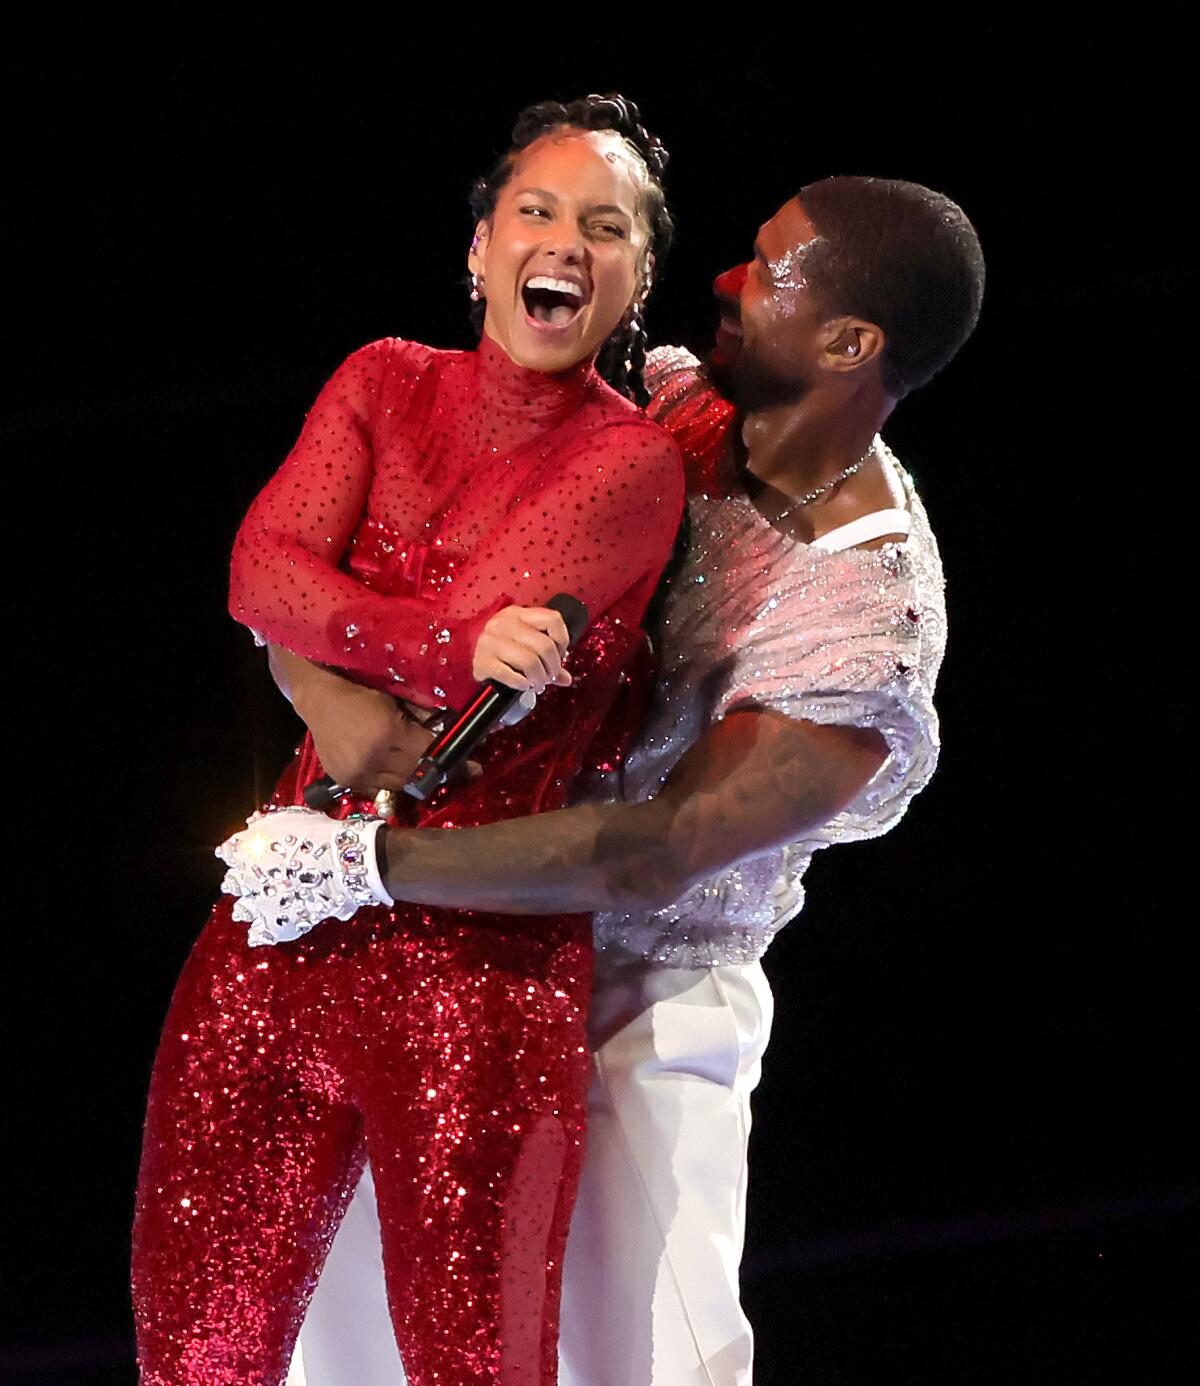 Alicia Keys laughs while holding a mic in a sparkly red catsuit while Usher in a white outfit holds his arm around her waist